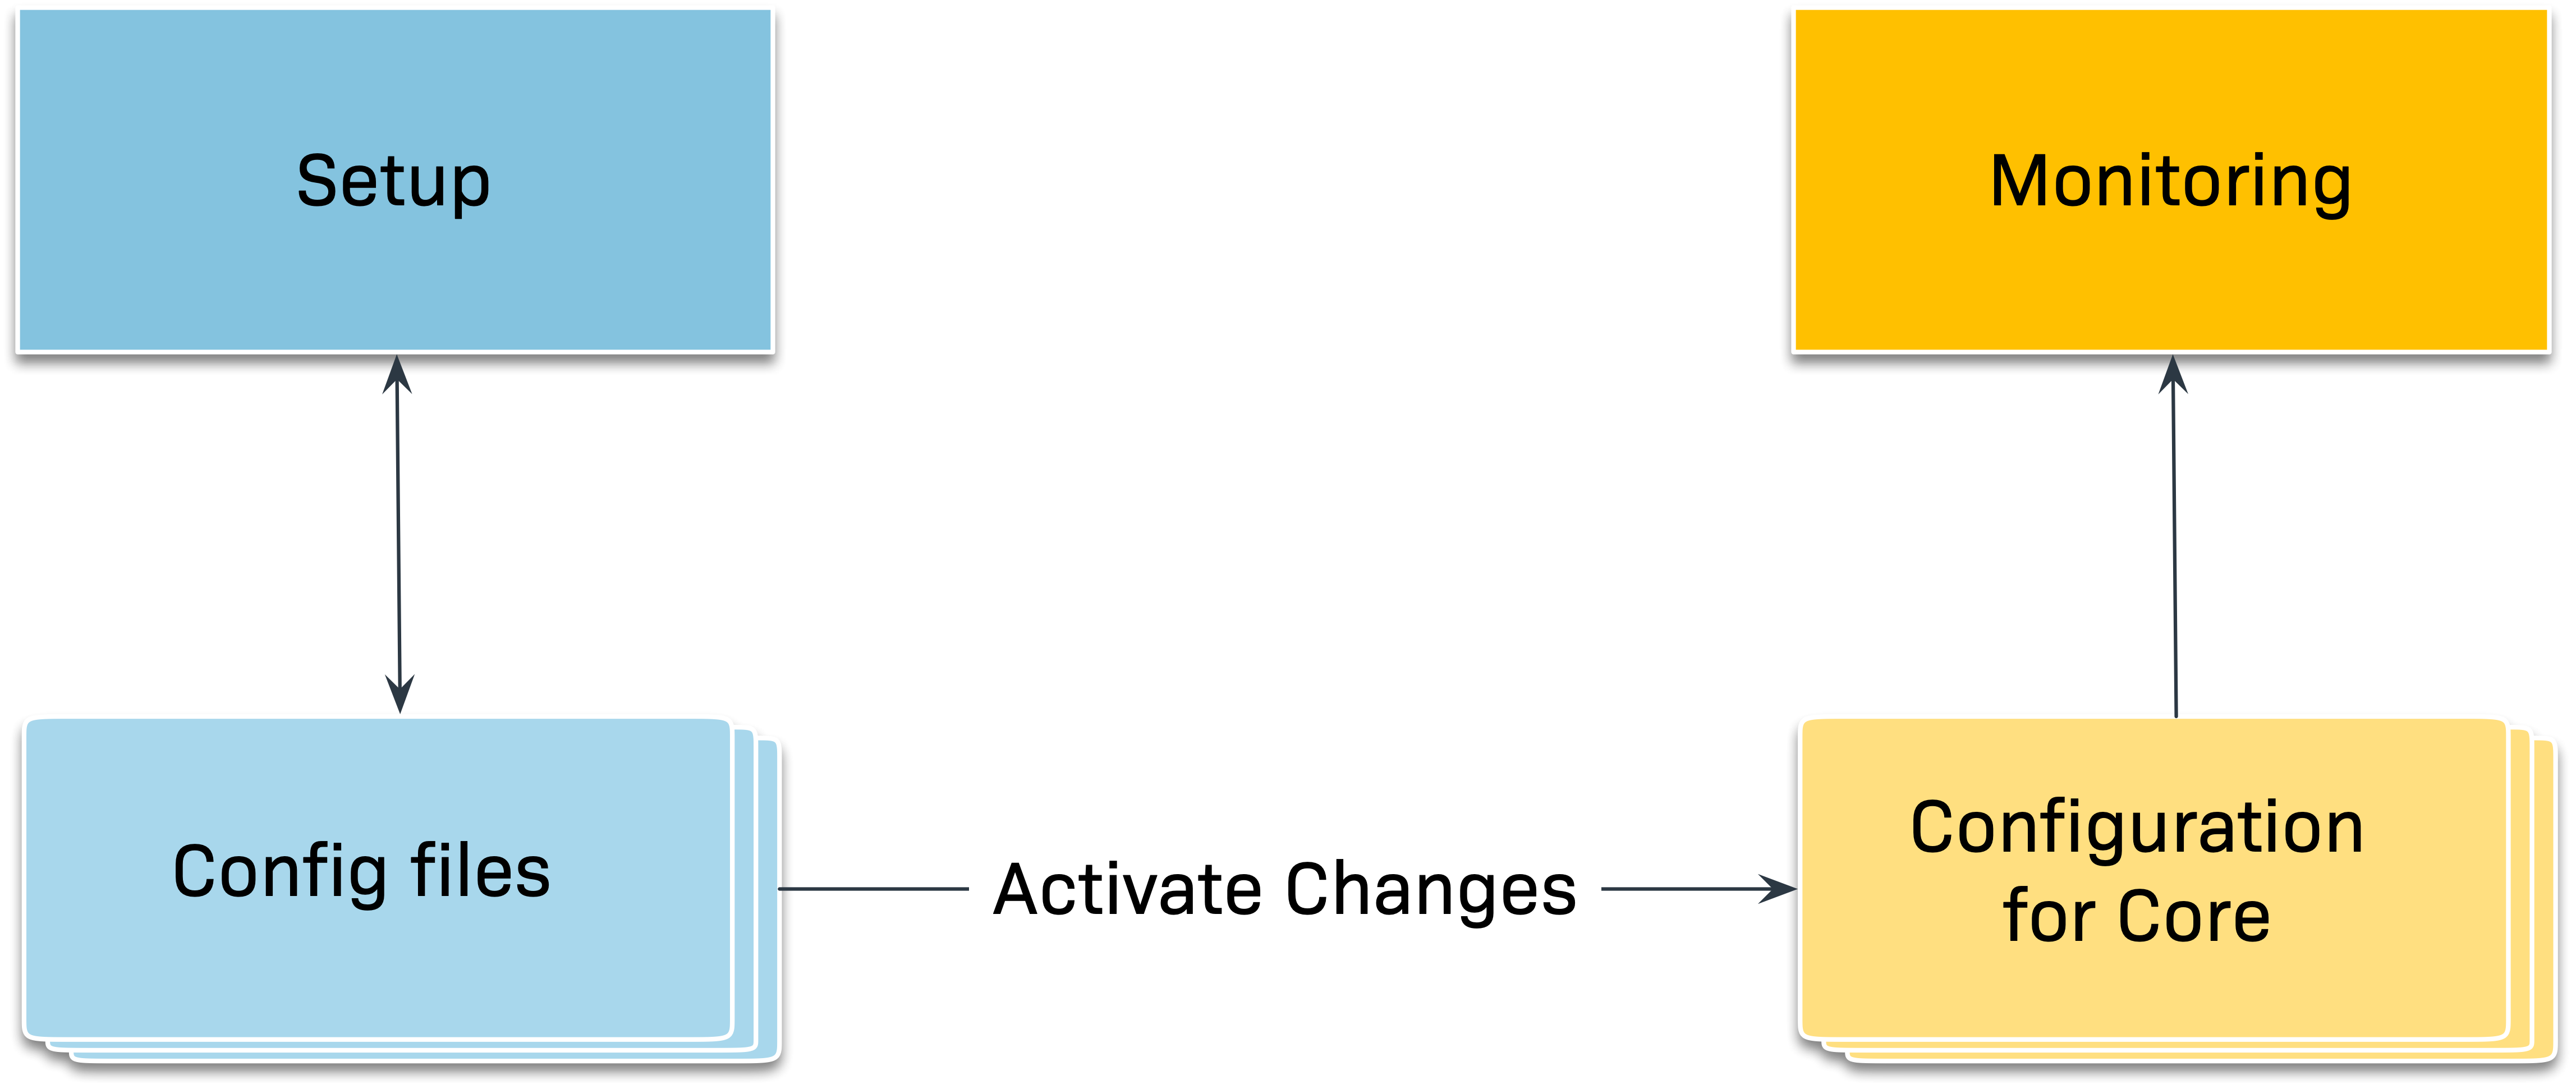 Illustration of the change activation from the configuration environment to the monitoring environment.